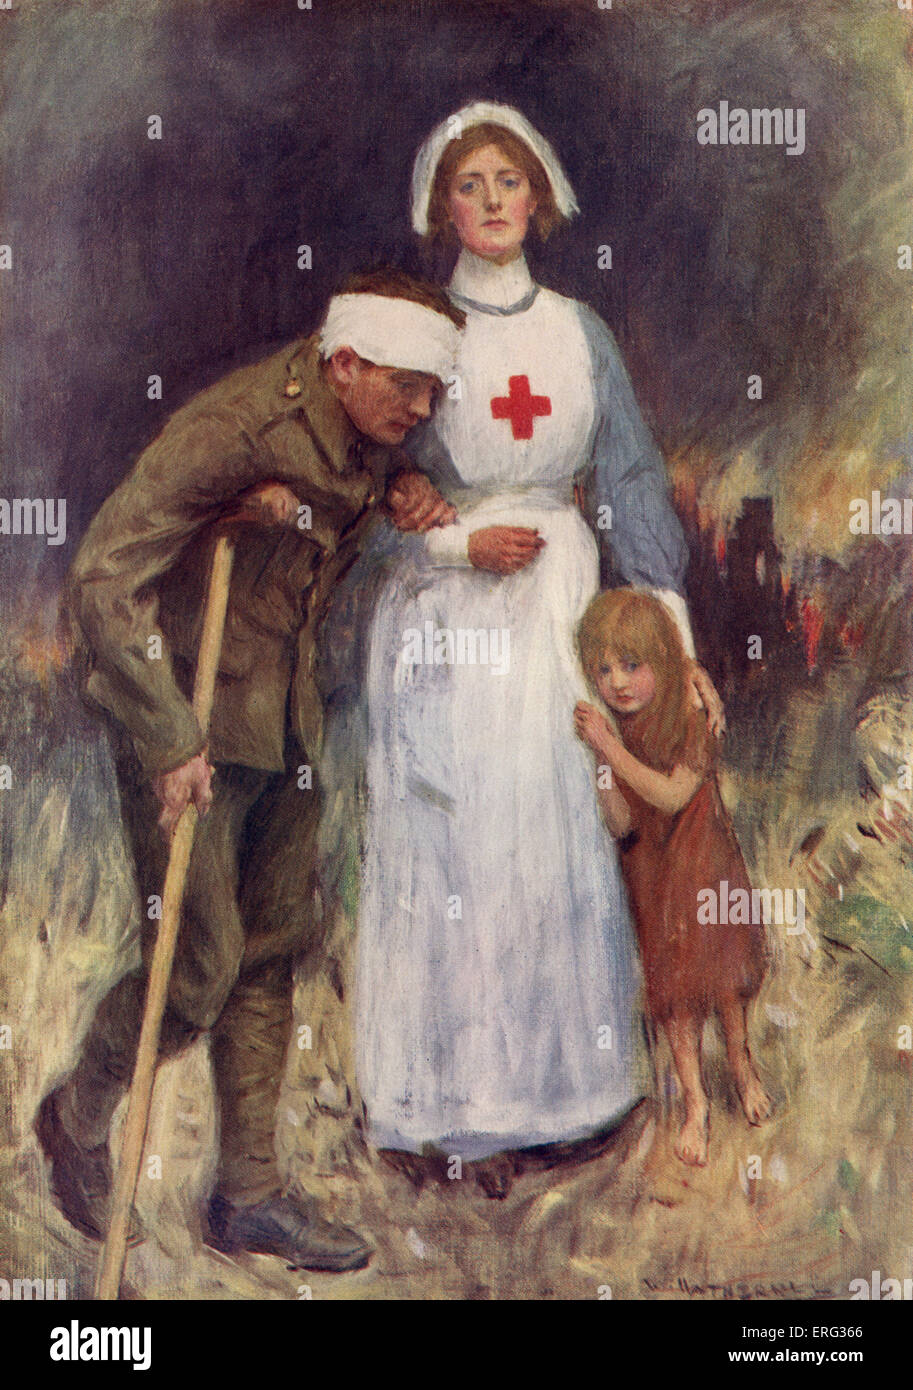 Red Cross nurse supporting an injured soldier and child dseeking shelter, copy of painting by  William Hatherell (1855-1928). Stock Photo